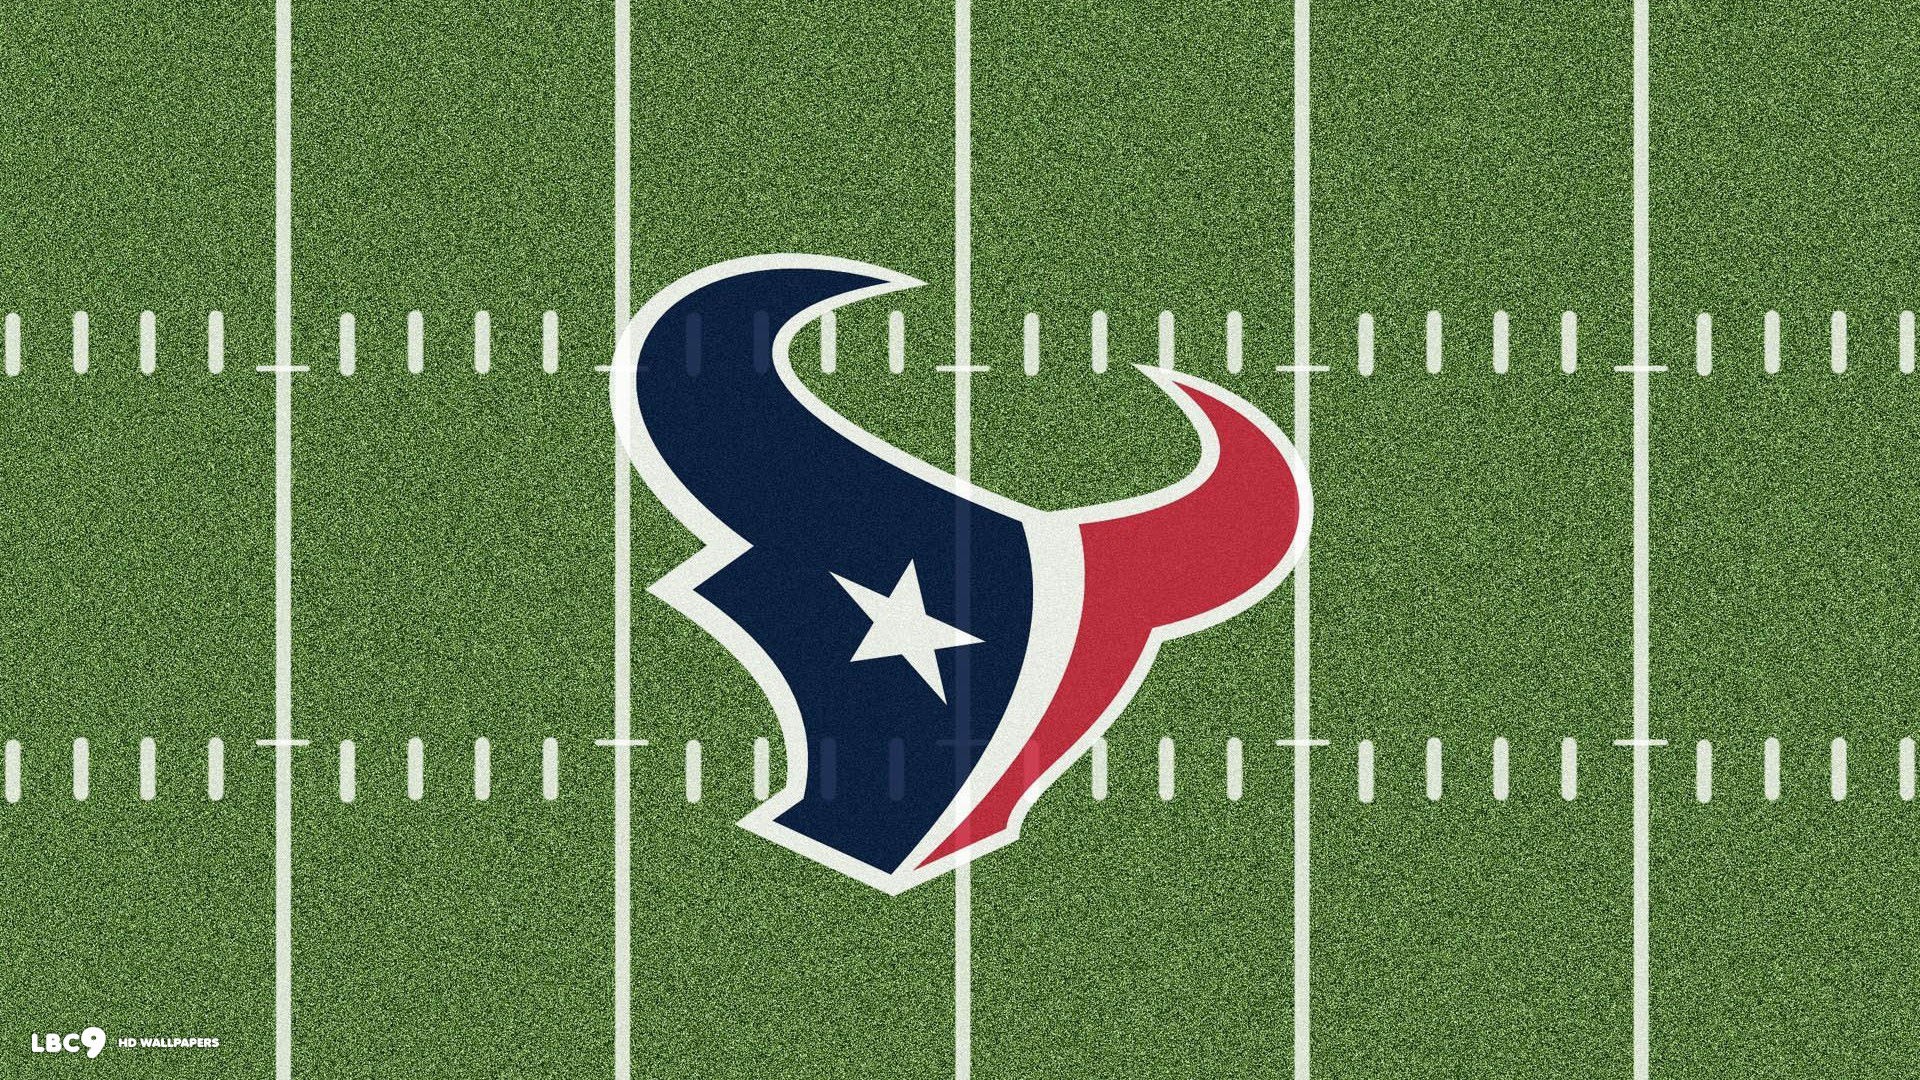 Houston Texans Nfl Wallpaper With Resolution Pixel - Houston Texans Banner - HD Wallpaper 